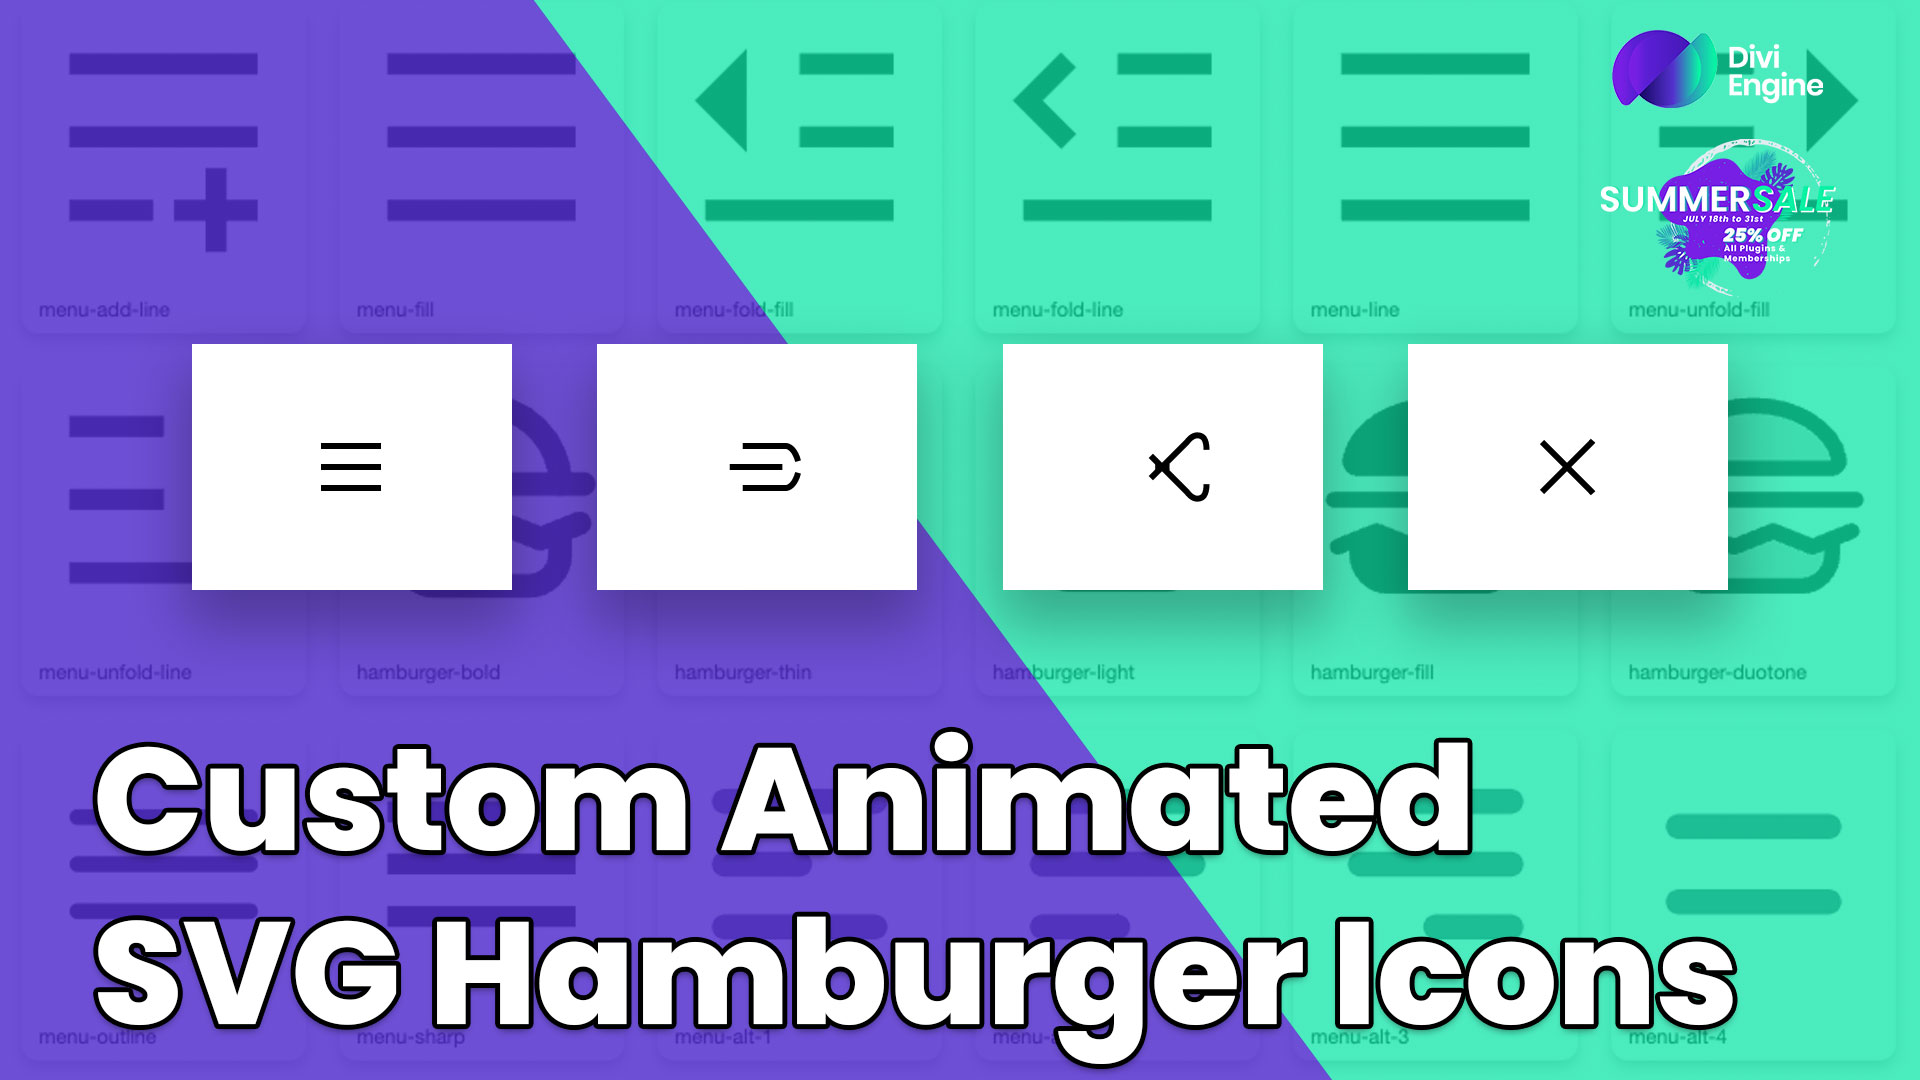 How to add a custom animated SVG hamburger icon to Divi - Divi Engine